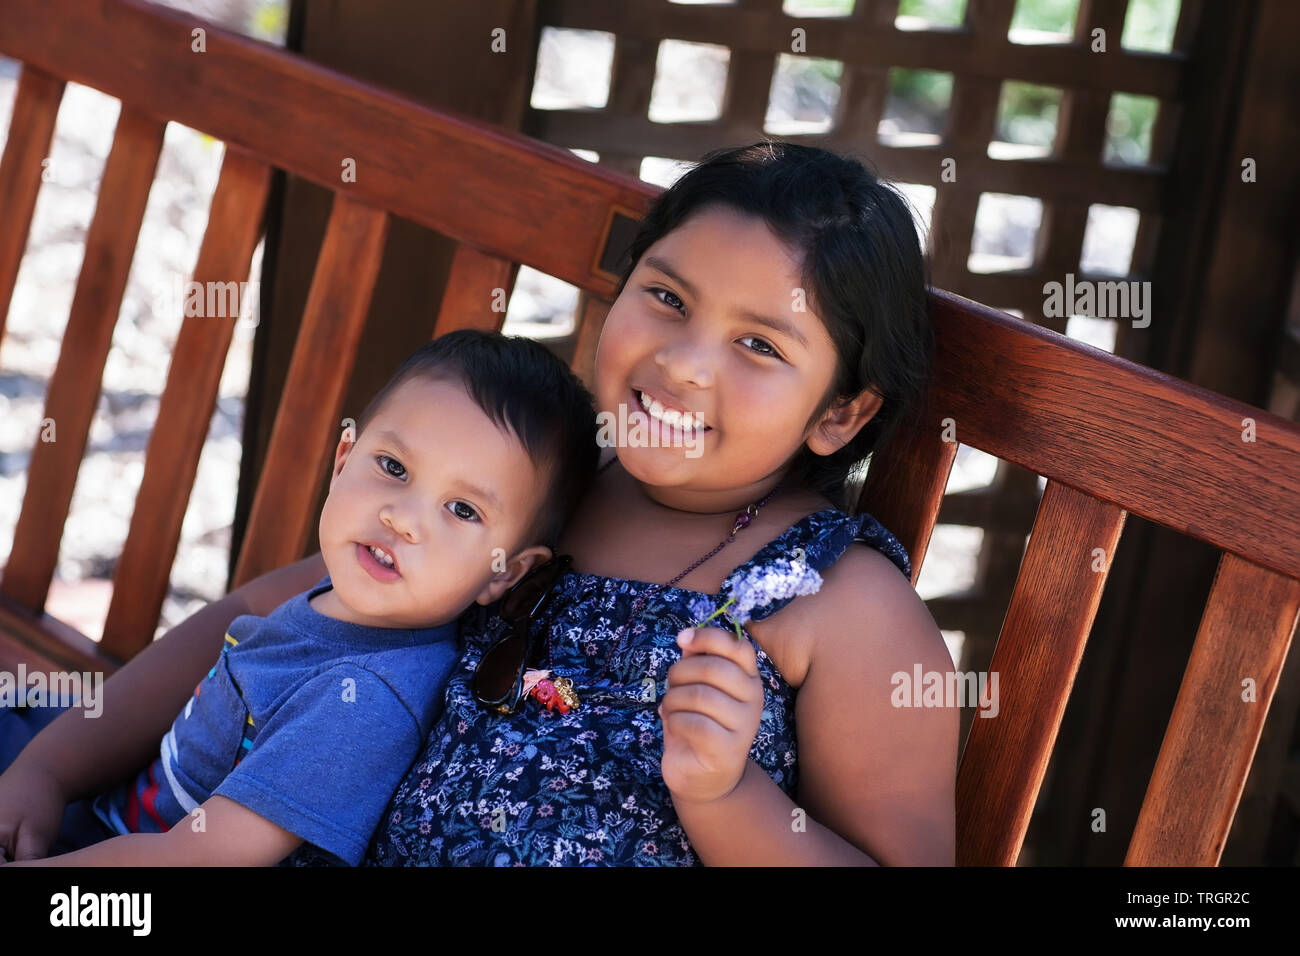 Two siblings, a young boy and older sister, sitting peacefully together on a bench. Stock Photo